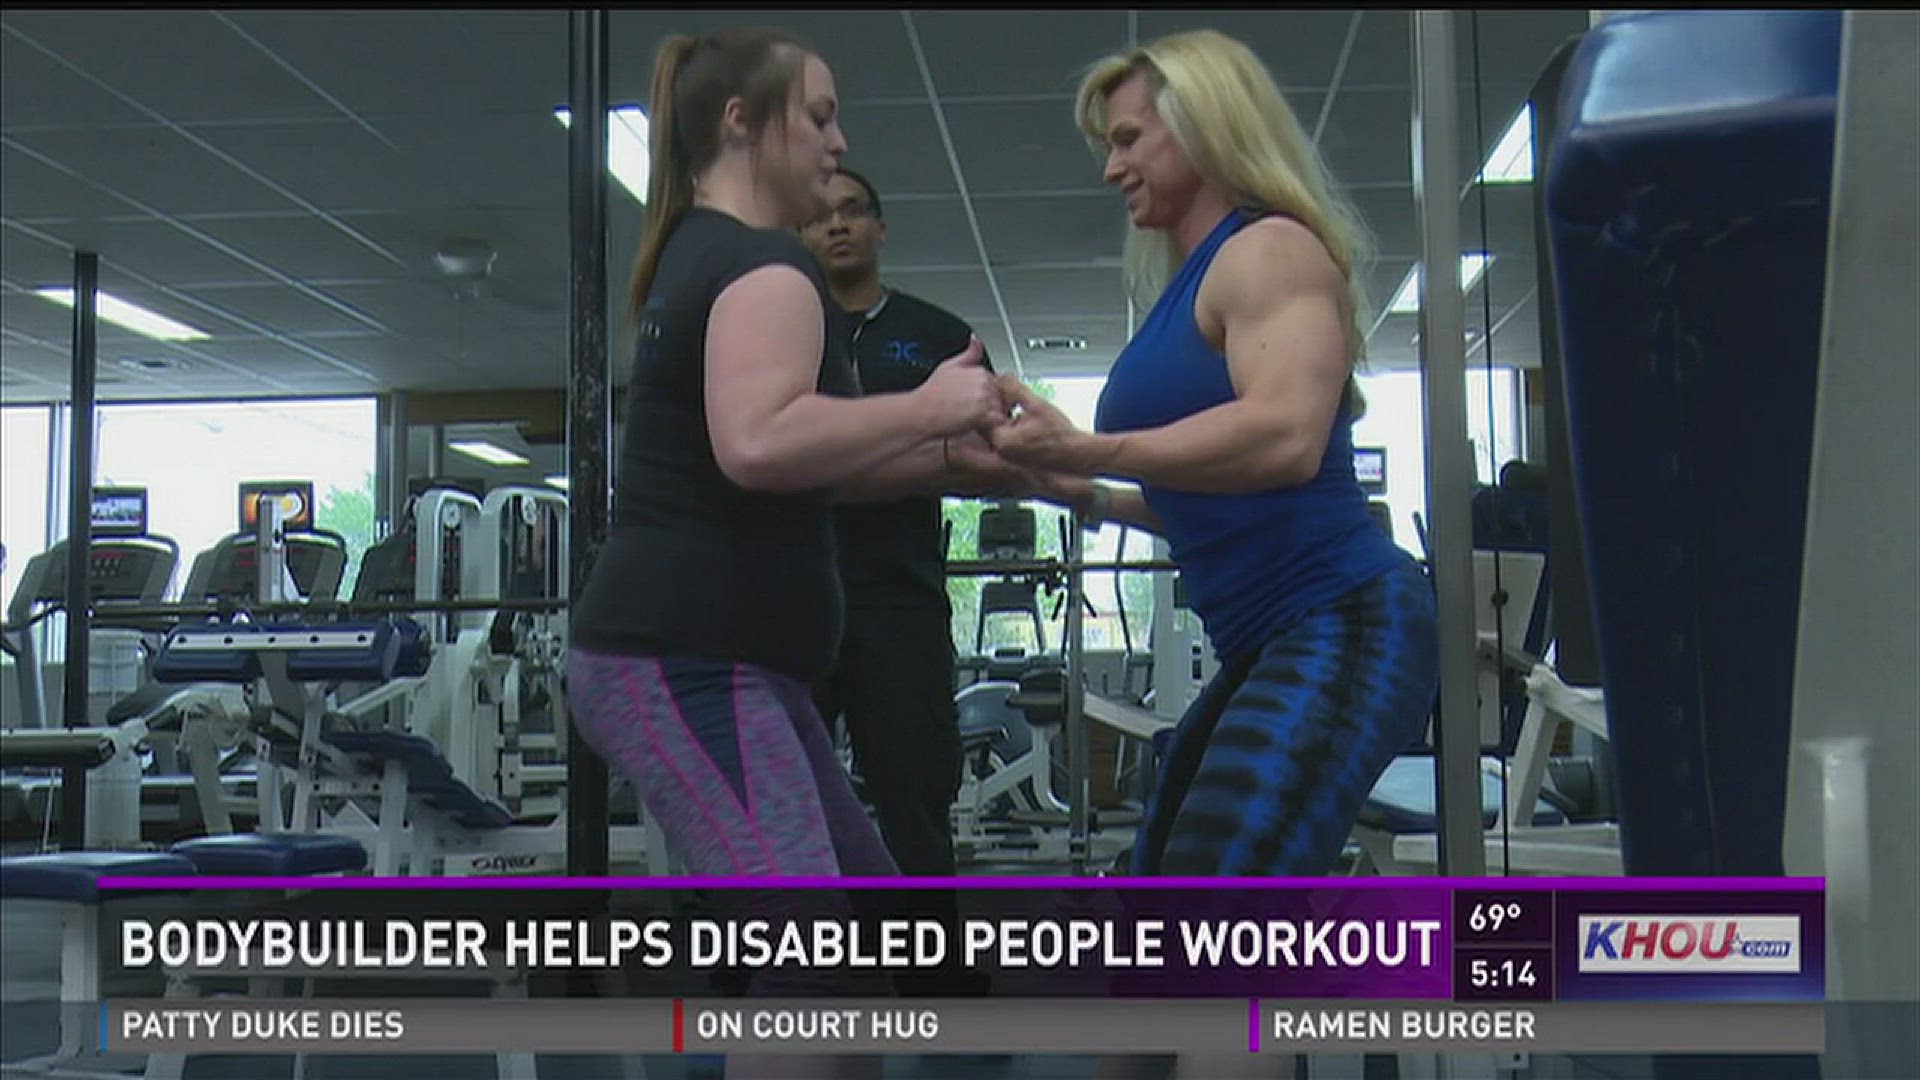 The goal for bodybuilder Tina Chandler is to help the differently-abled.